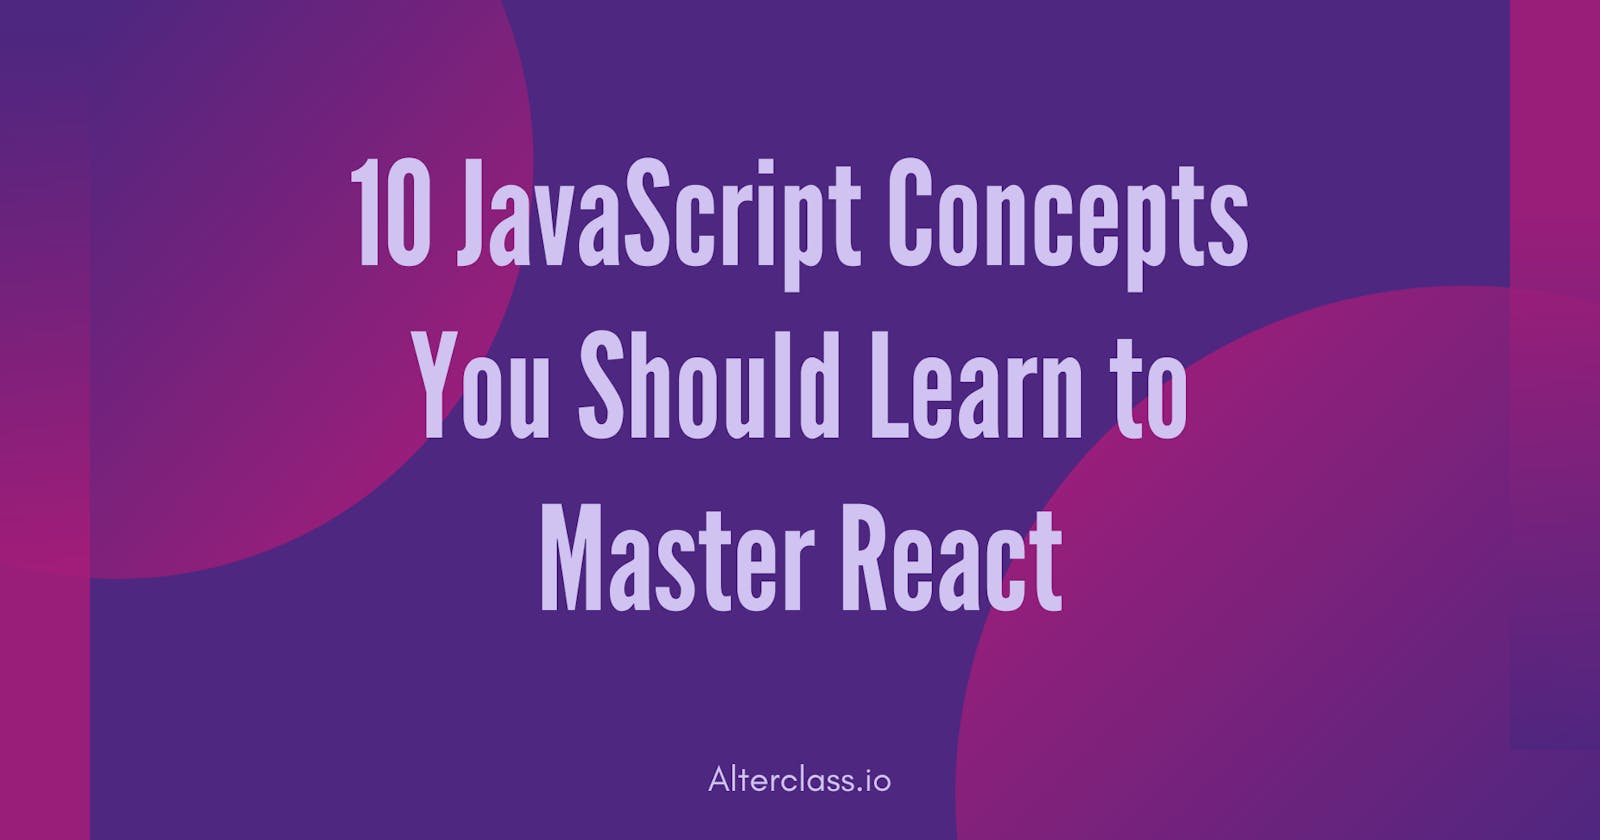 10 JavaScript Concepts You Should Learn to Master React